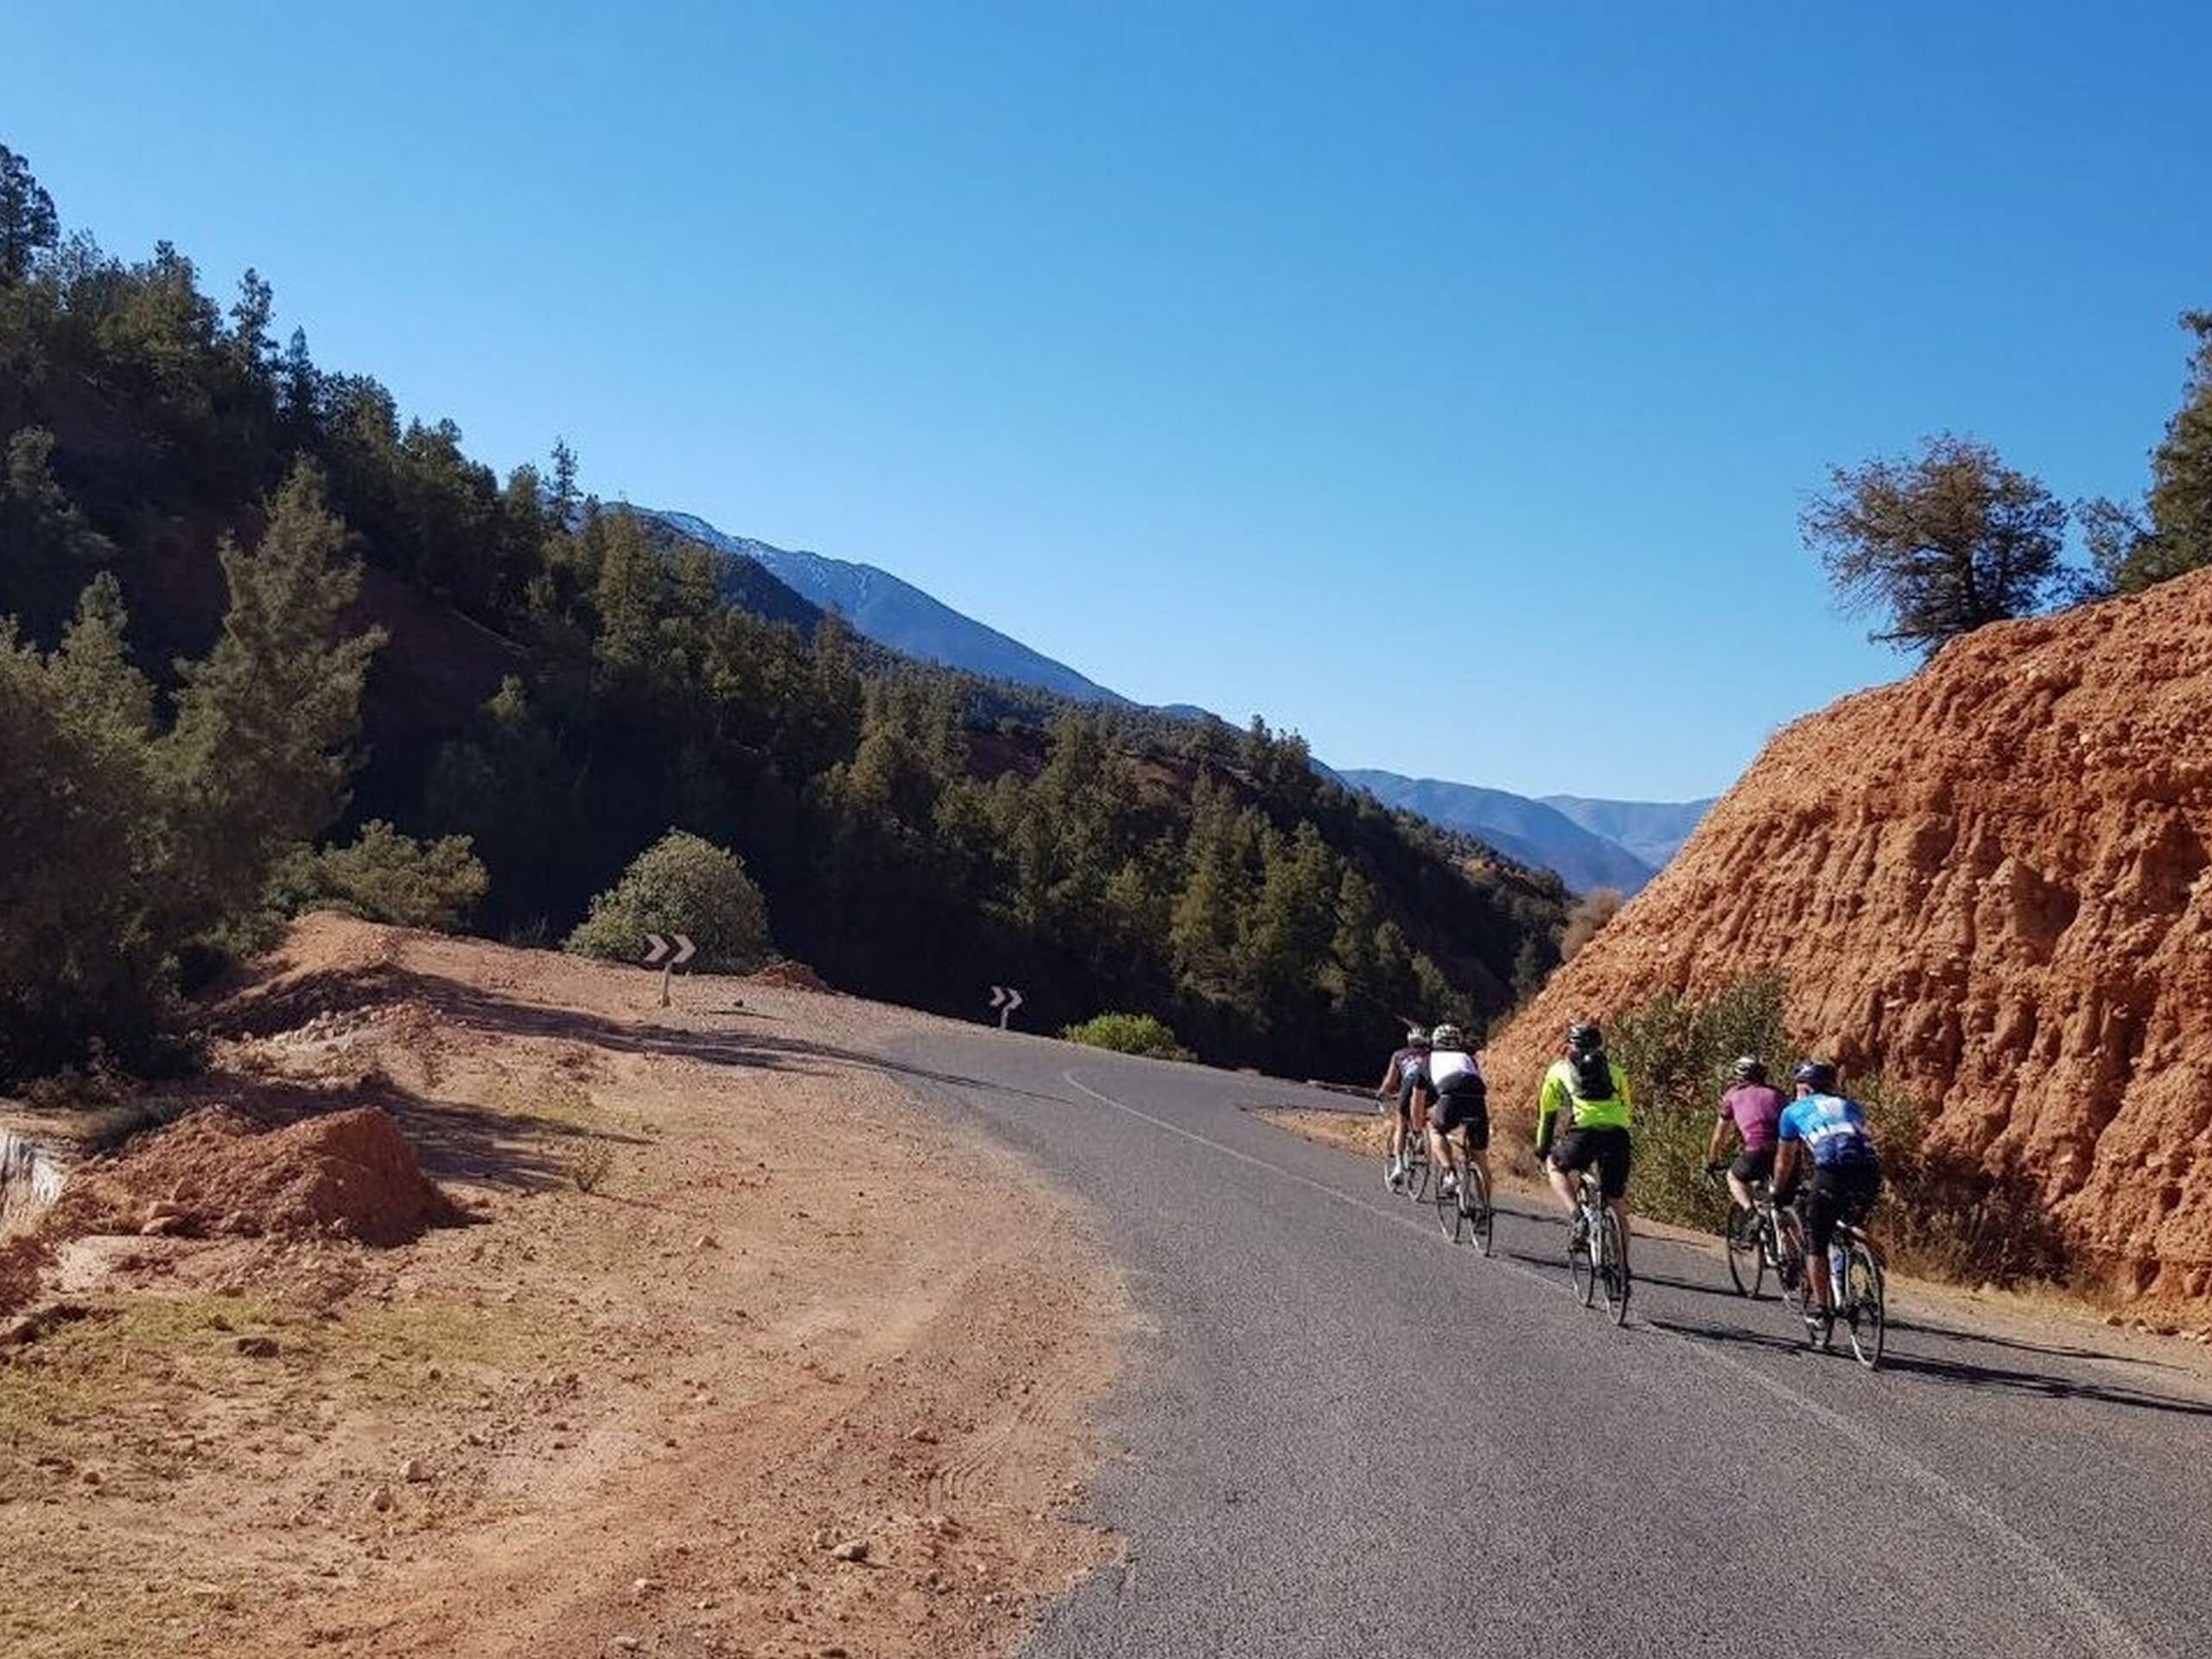 Group of road bikers in Morocco